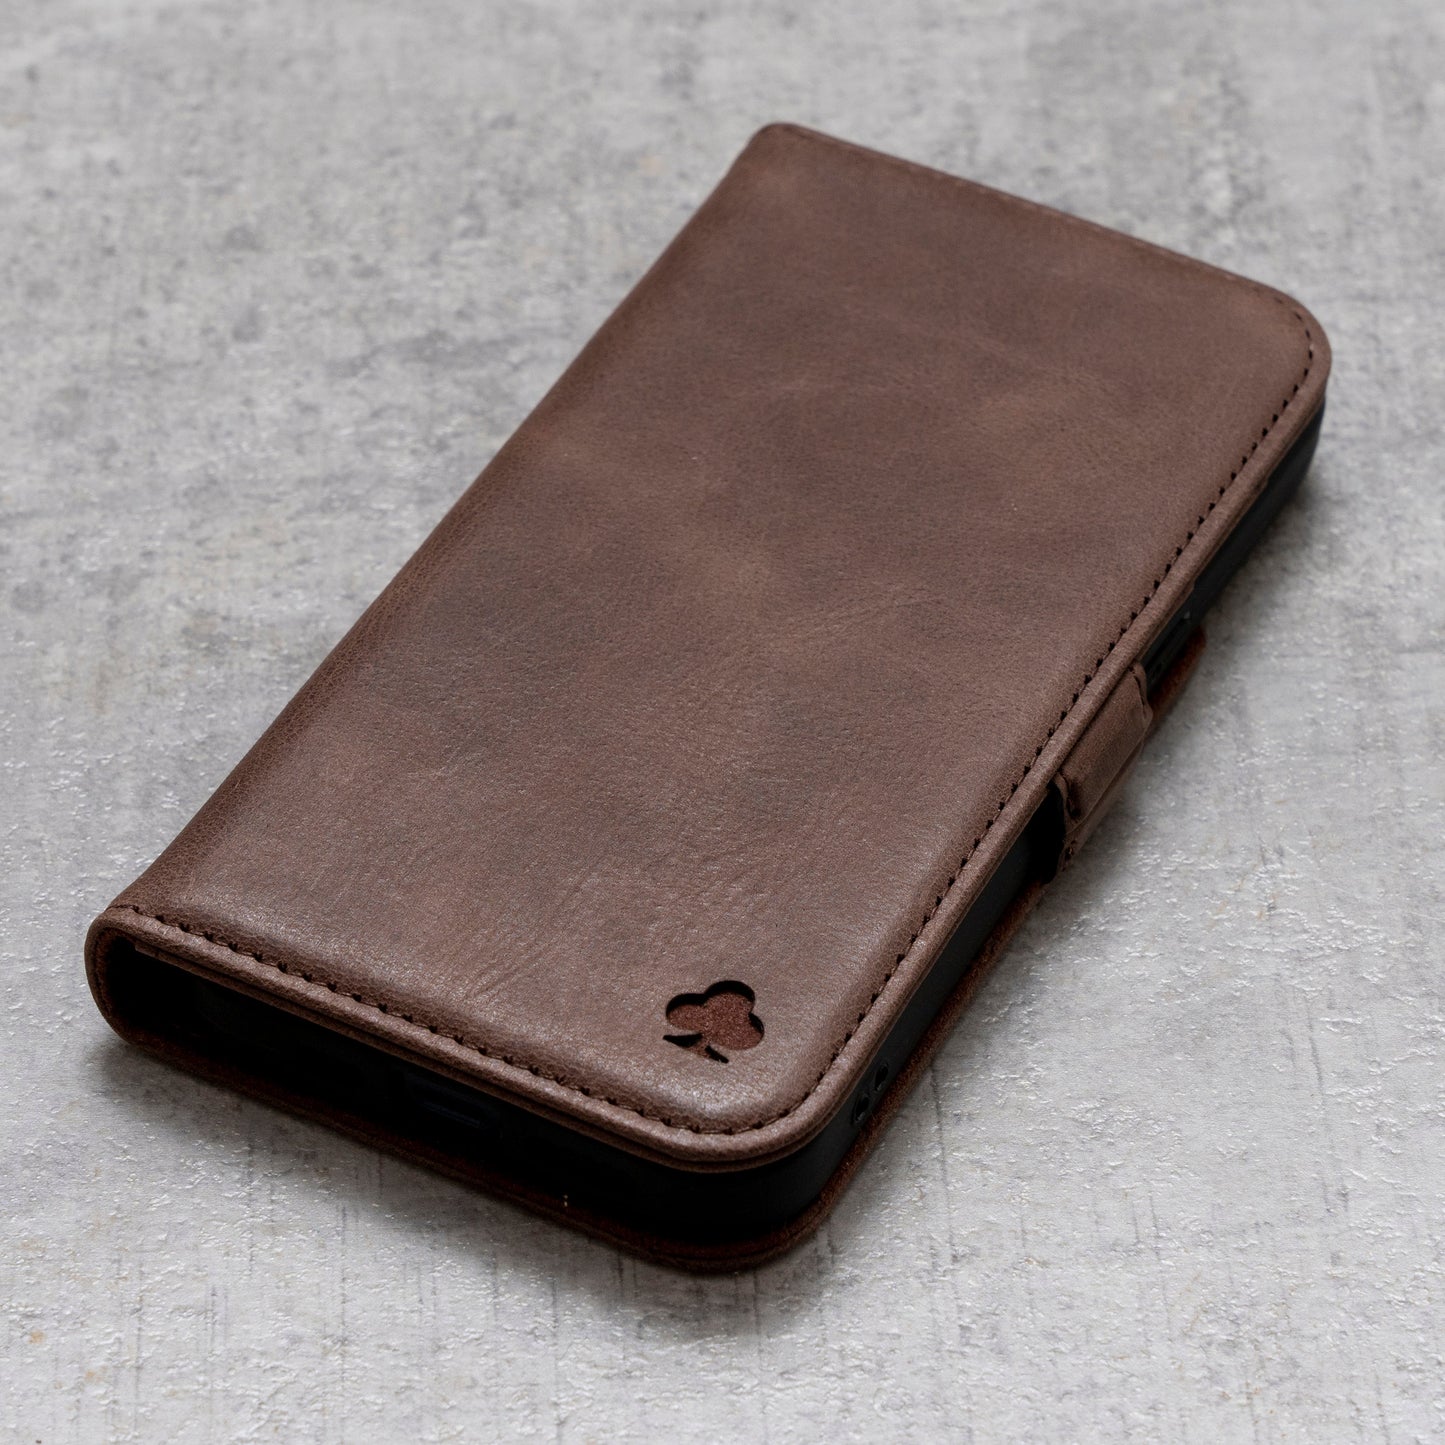 iPhone 15 Plus Leather Case. Premium Slim Genuine Leather Stand Case/Cover/Wallet (Chocolate Brown)